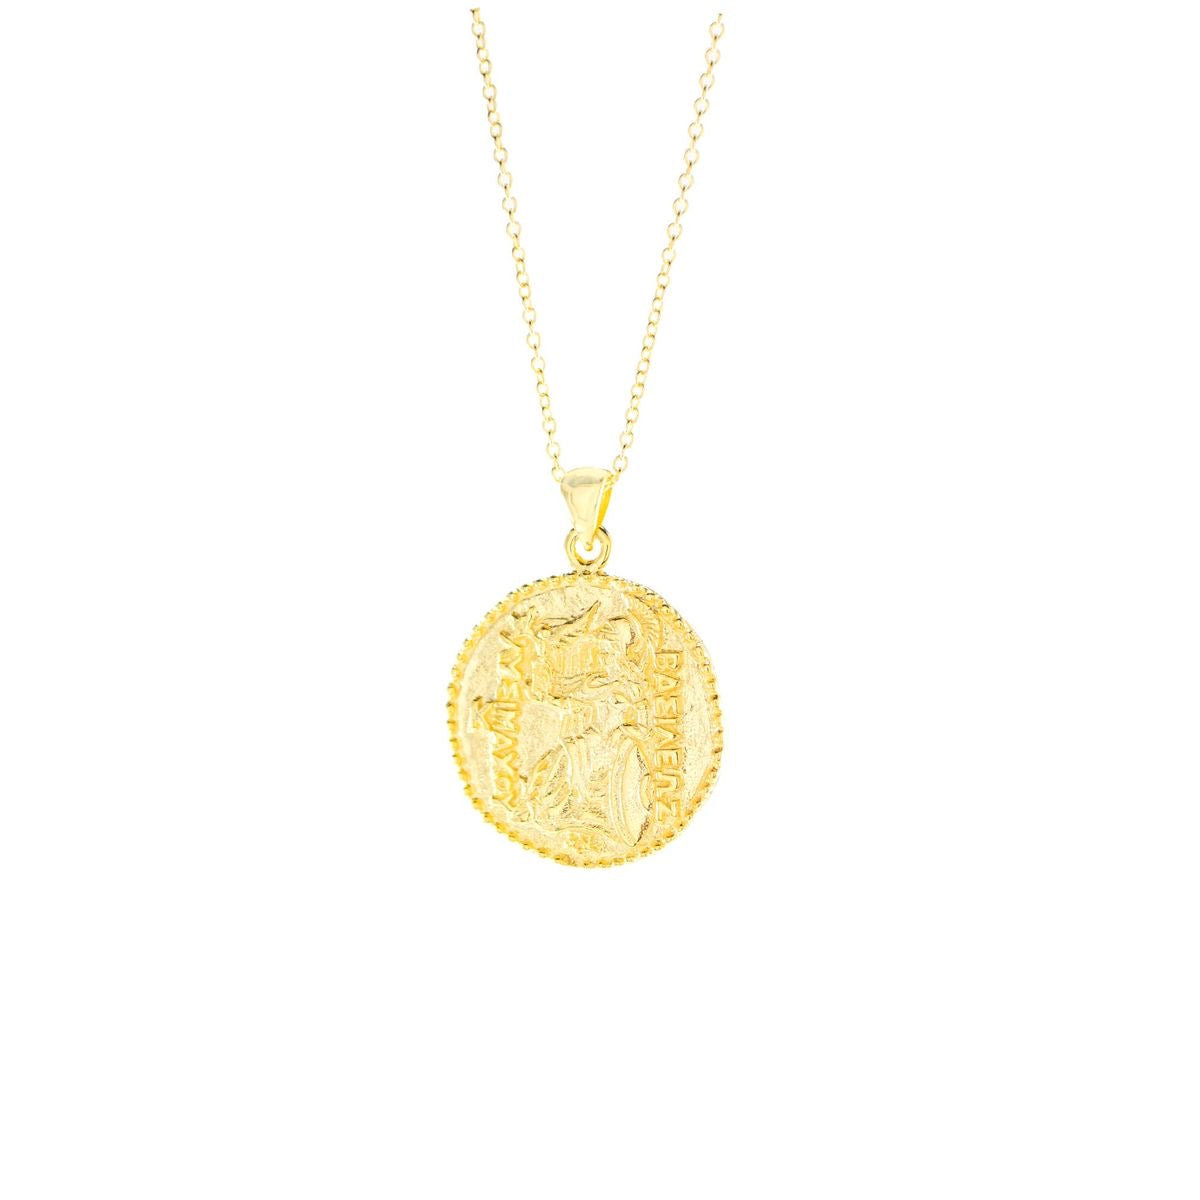 Letter A Coin Charm in 18k Gold Vermeil